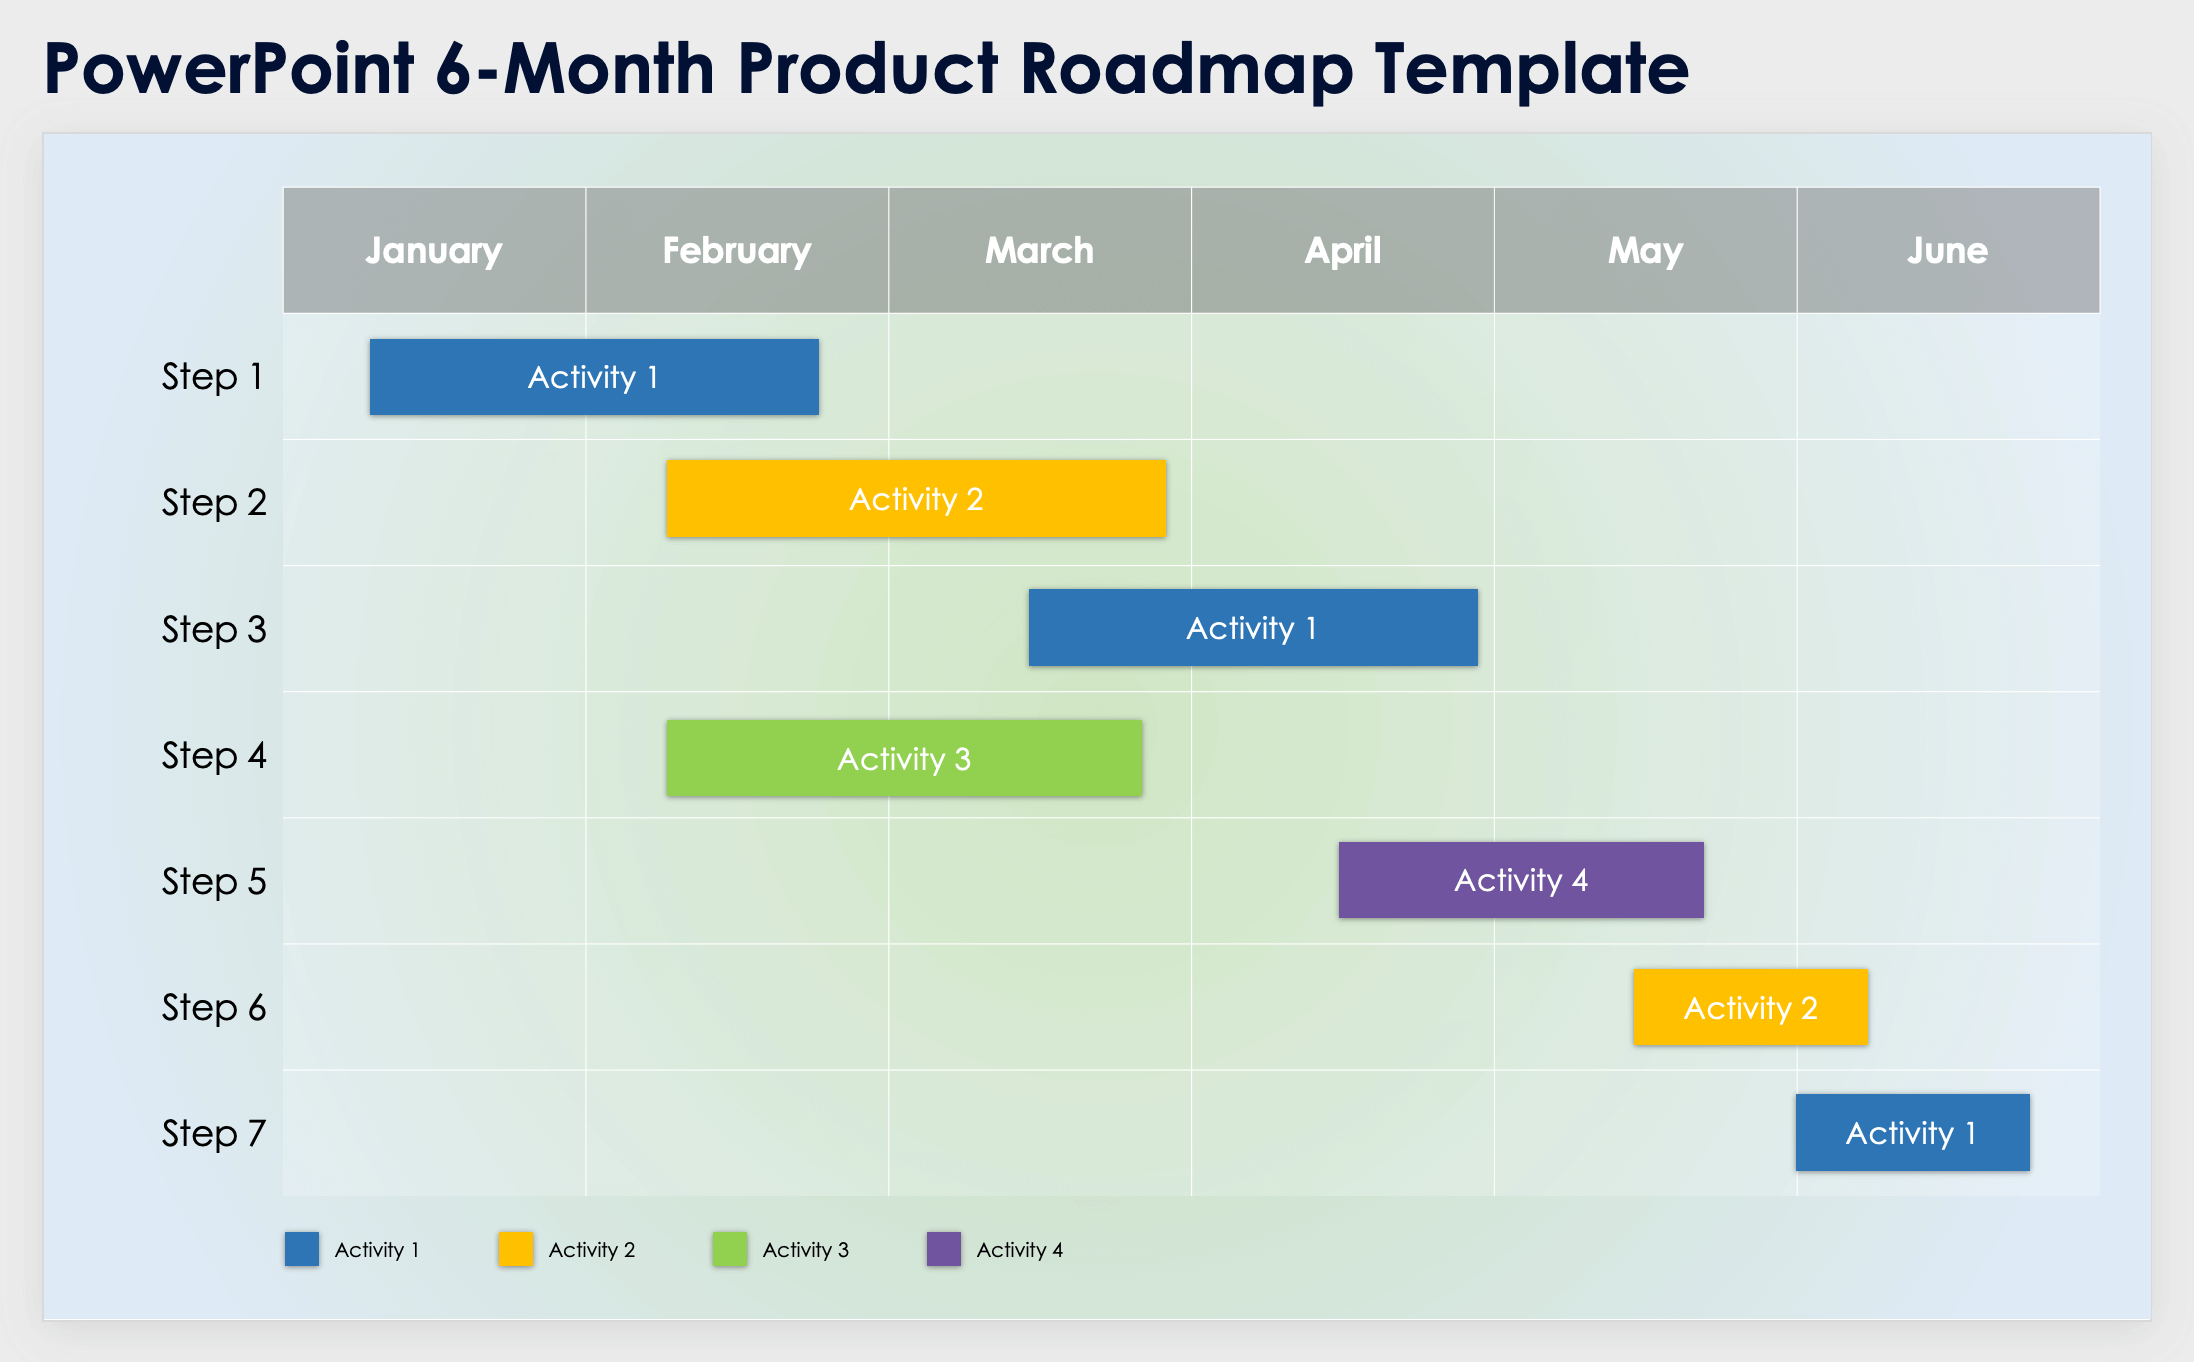 PowerPoint 6 Month Product Roadmap Template